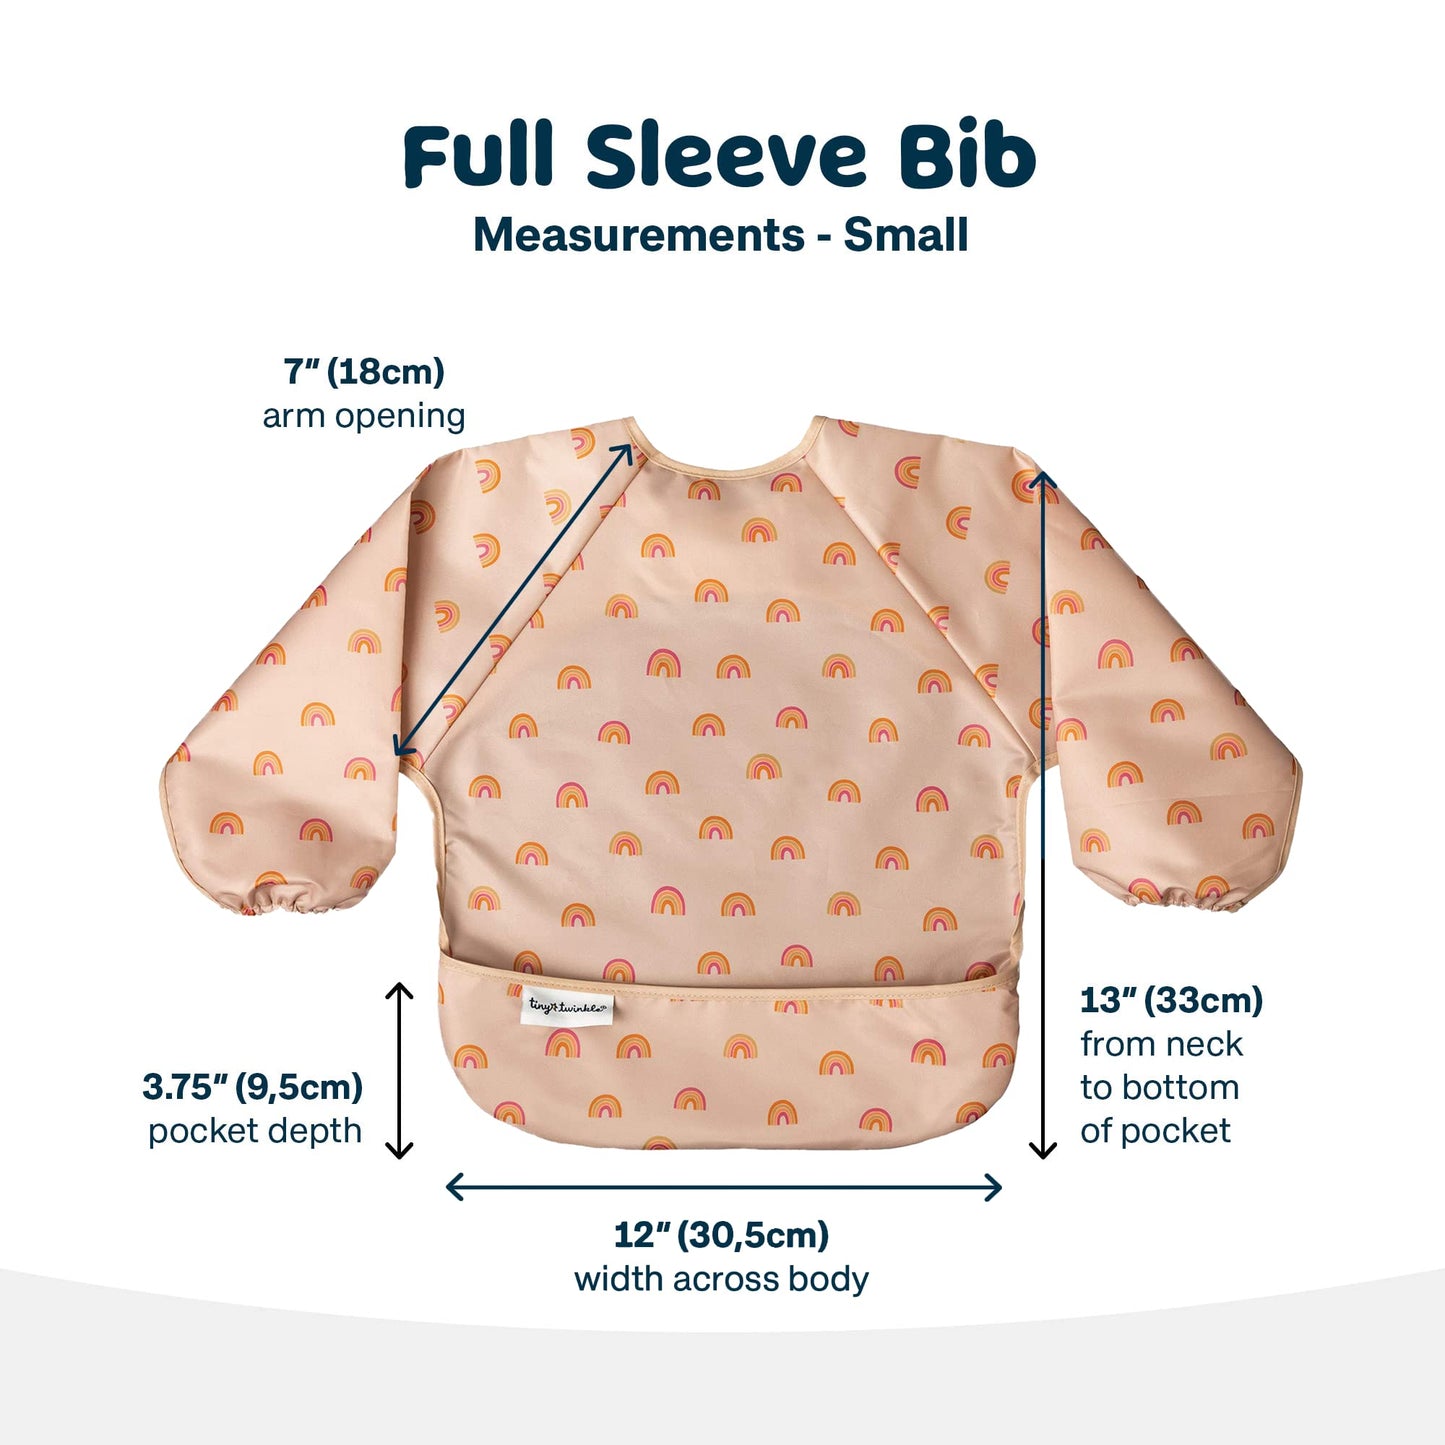 Tiny Twinkle Mess Proof Baby Bib, Cute Full Sleeve Bib Outfit, Waterproof Bibs for Toddlers, Machine Washable, Tug Proof Closure, Baby Smock for Eating, Long Sleeve (Boho Rainbow, Small 6-24 Months)